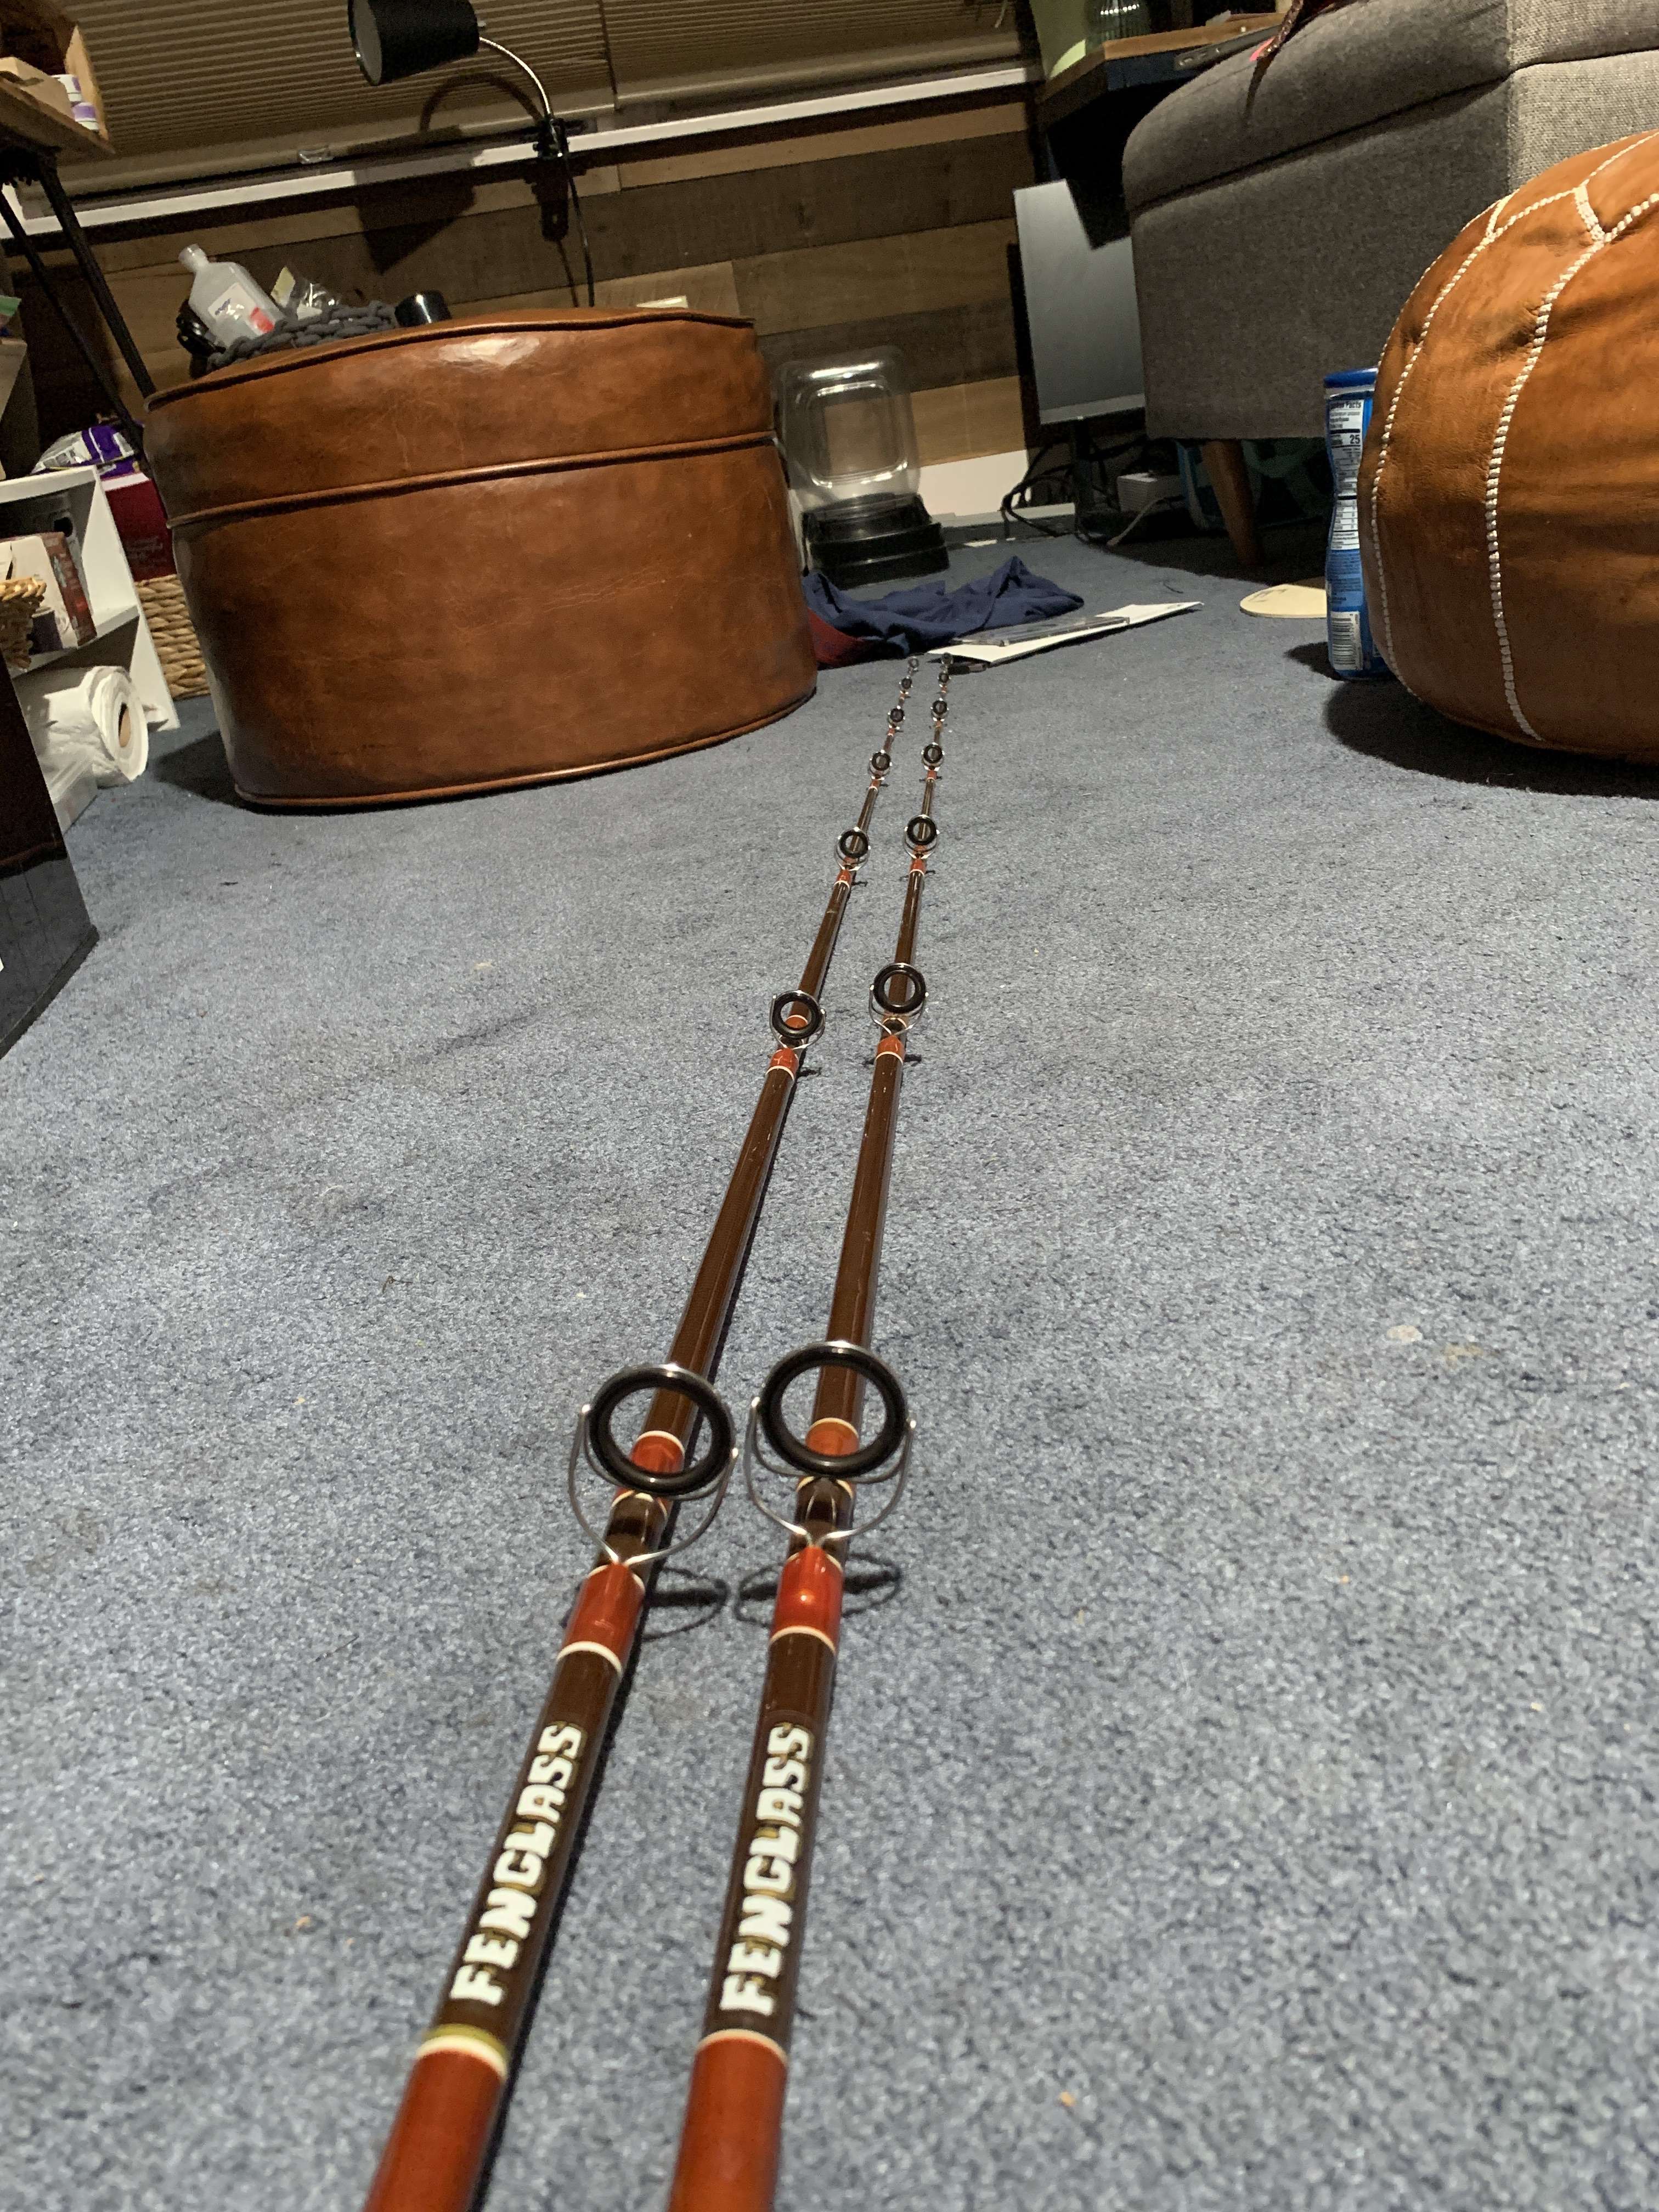 Help identify these rods - Fishing Rods, Reels, Line, and ...